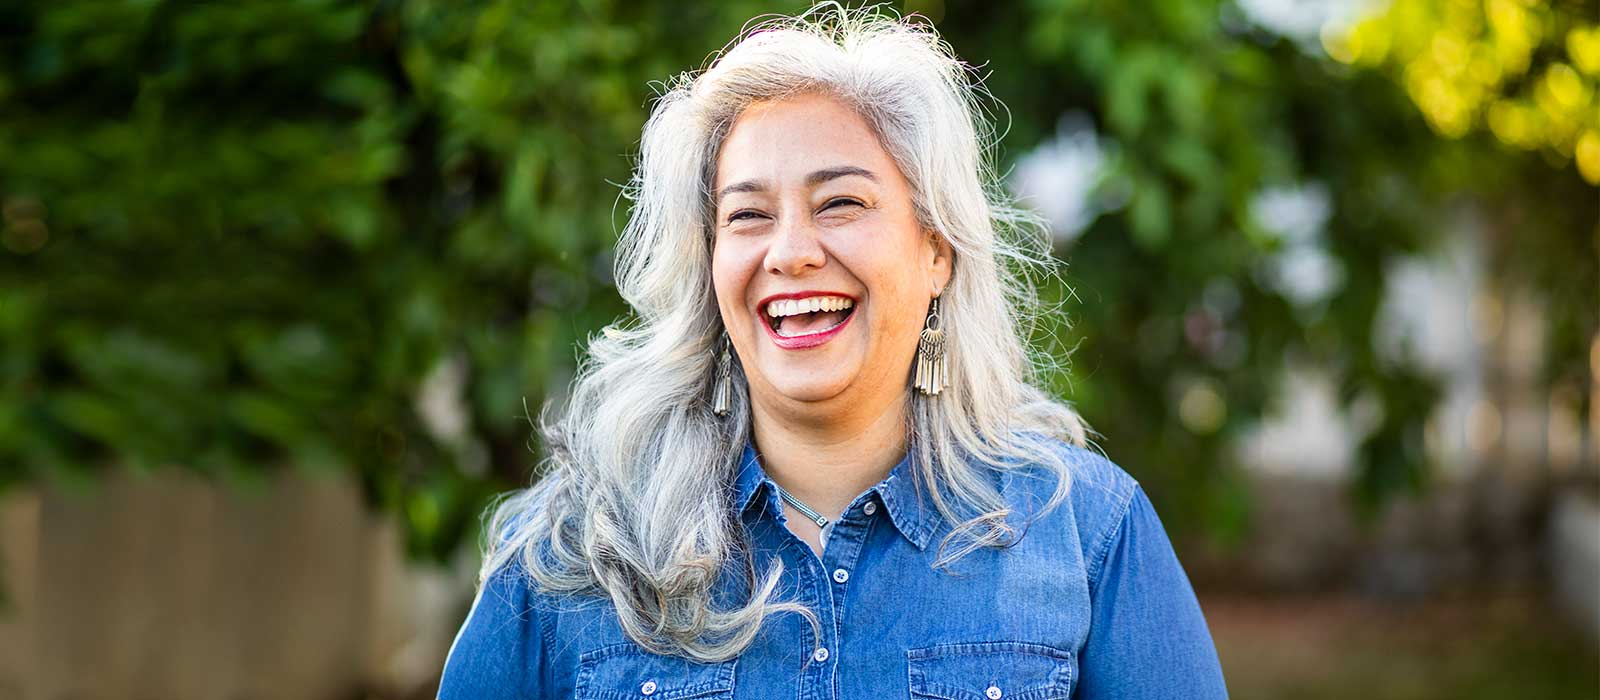 smiling confident woman with silver hair